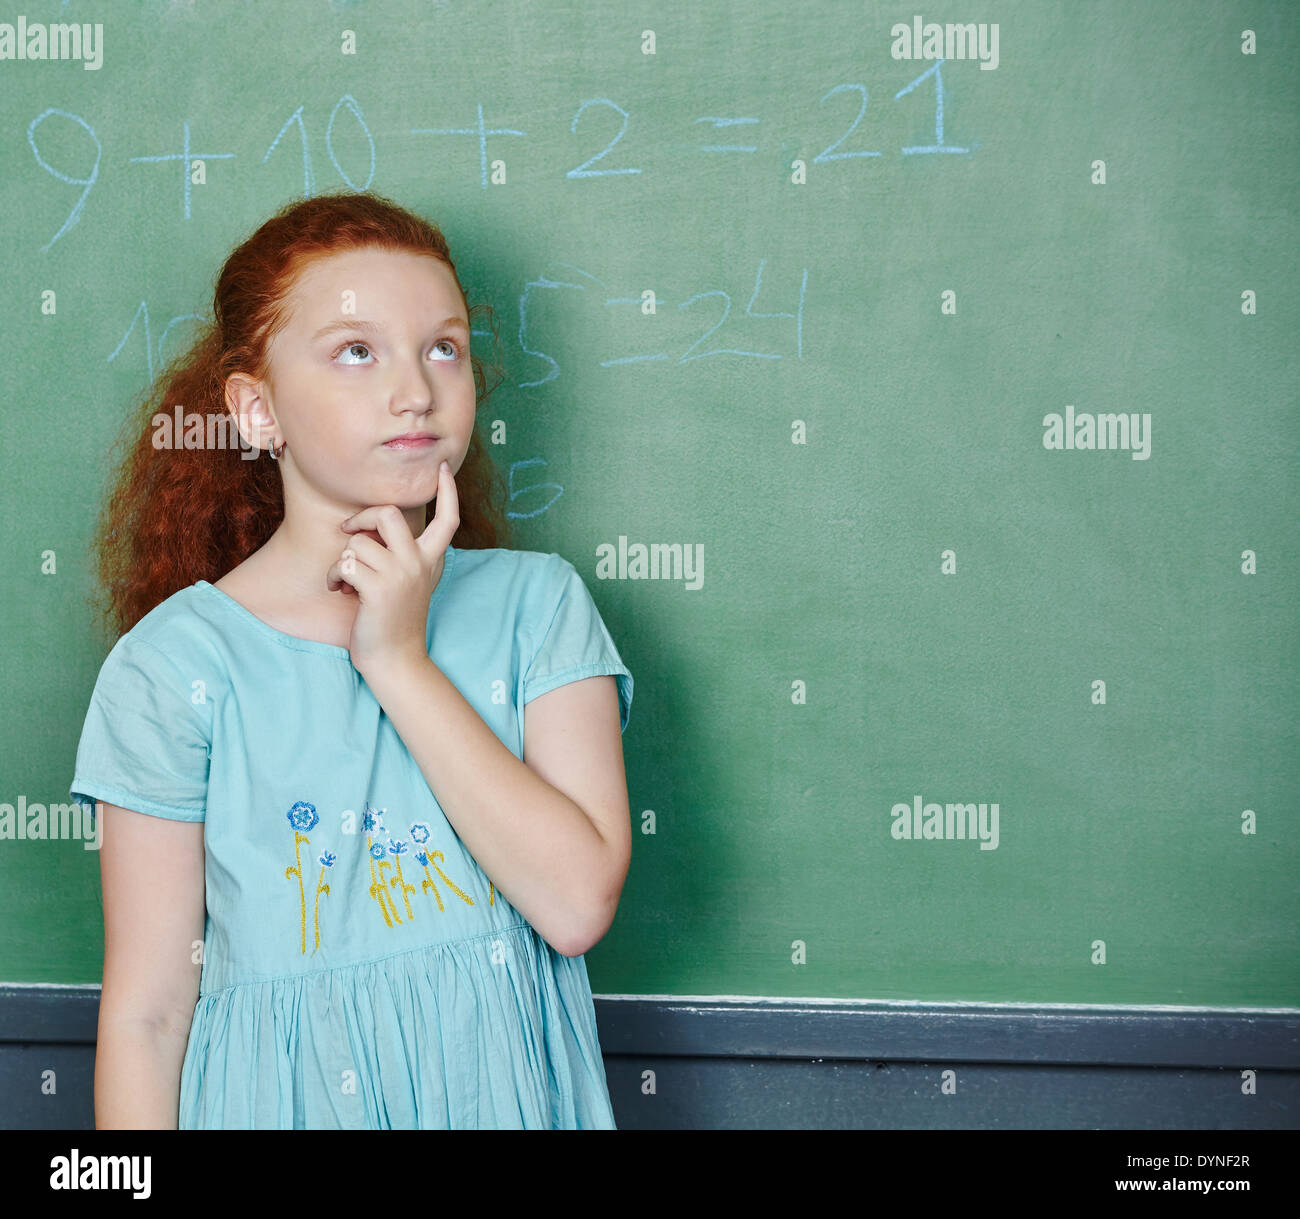 Pensive girl solving math problem in elementary school class Stock Photo